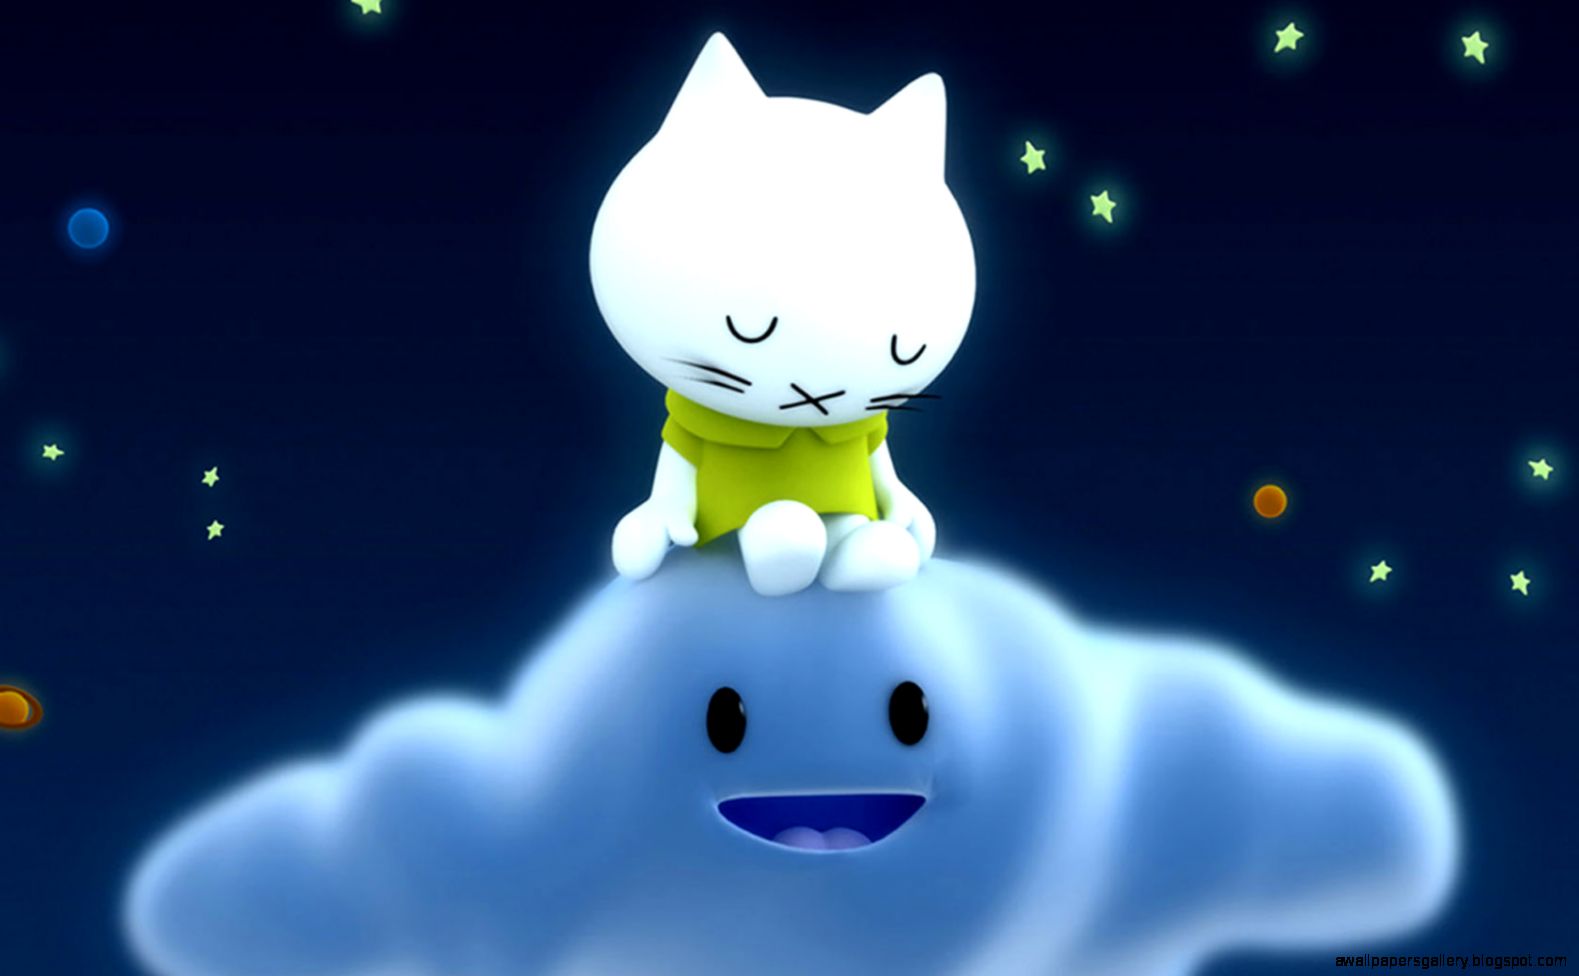 Cute Animated Wallpapers For Desktop